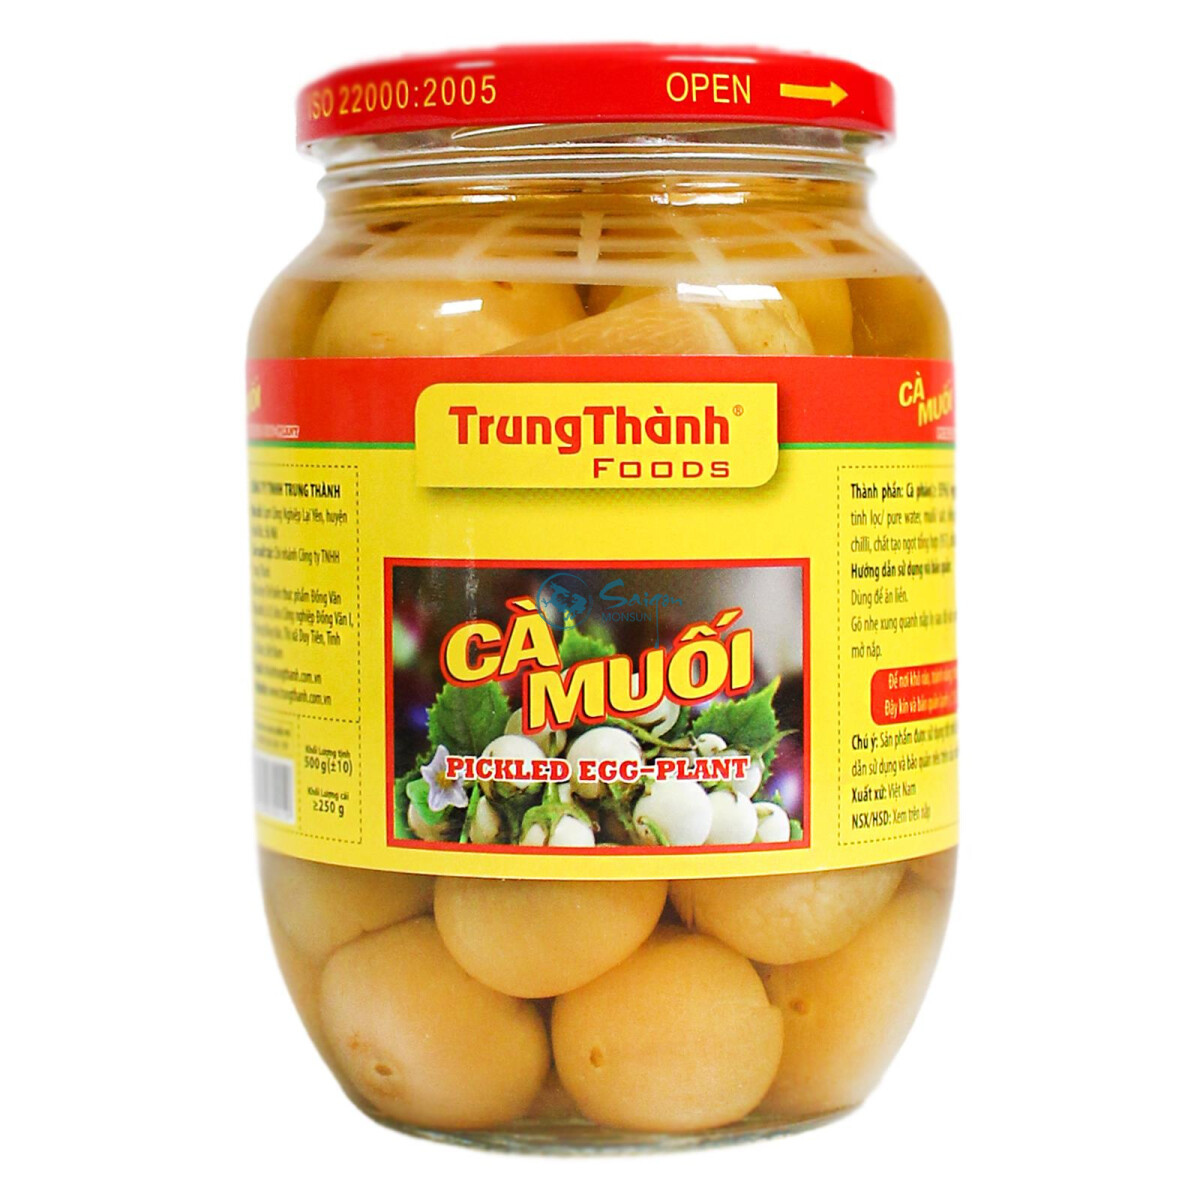 Trung Thanh Ca Muoi 500g/ATG250g